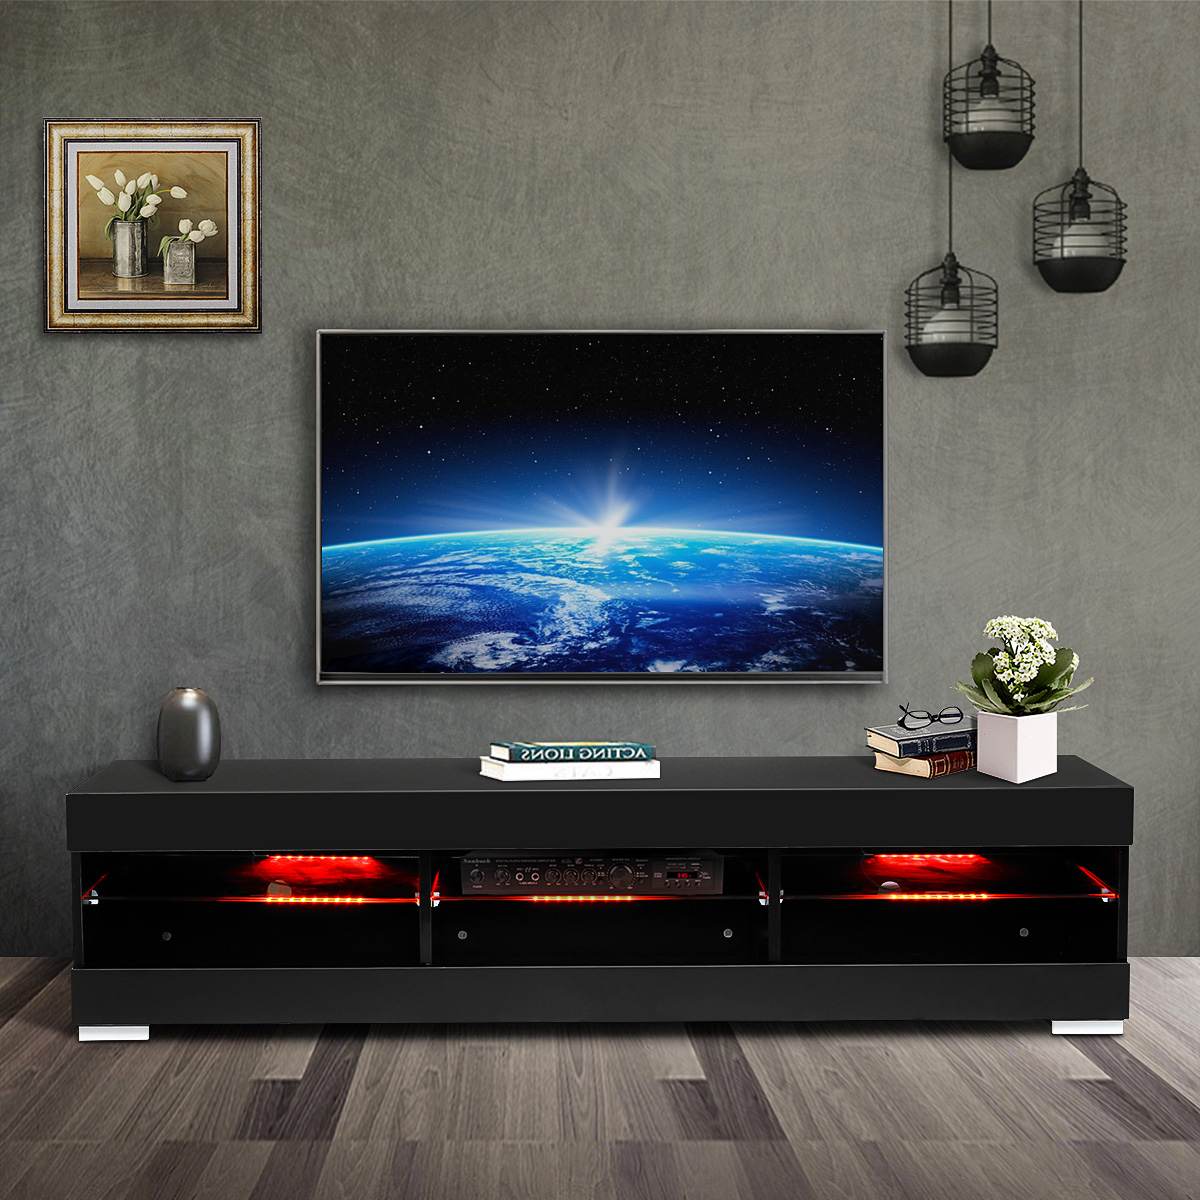 57 inch RGB LED TV Unit Cabinet Stands with 6 Open Drawers TV Bracket Table Home Living Room Furniture tv Stands high gloss